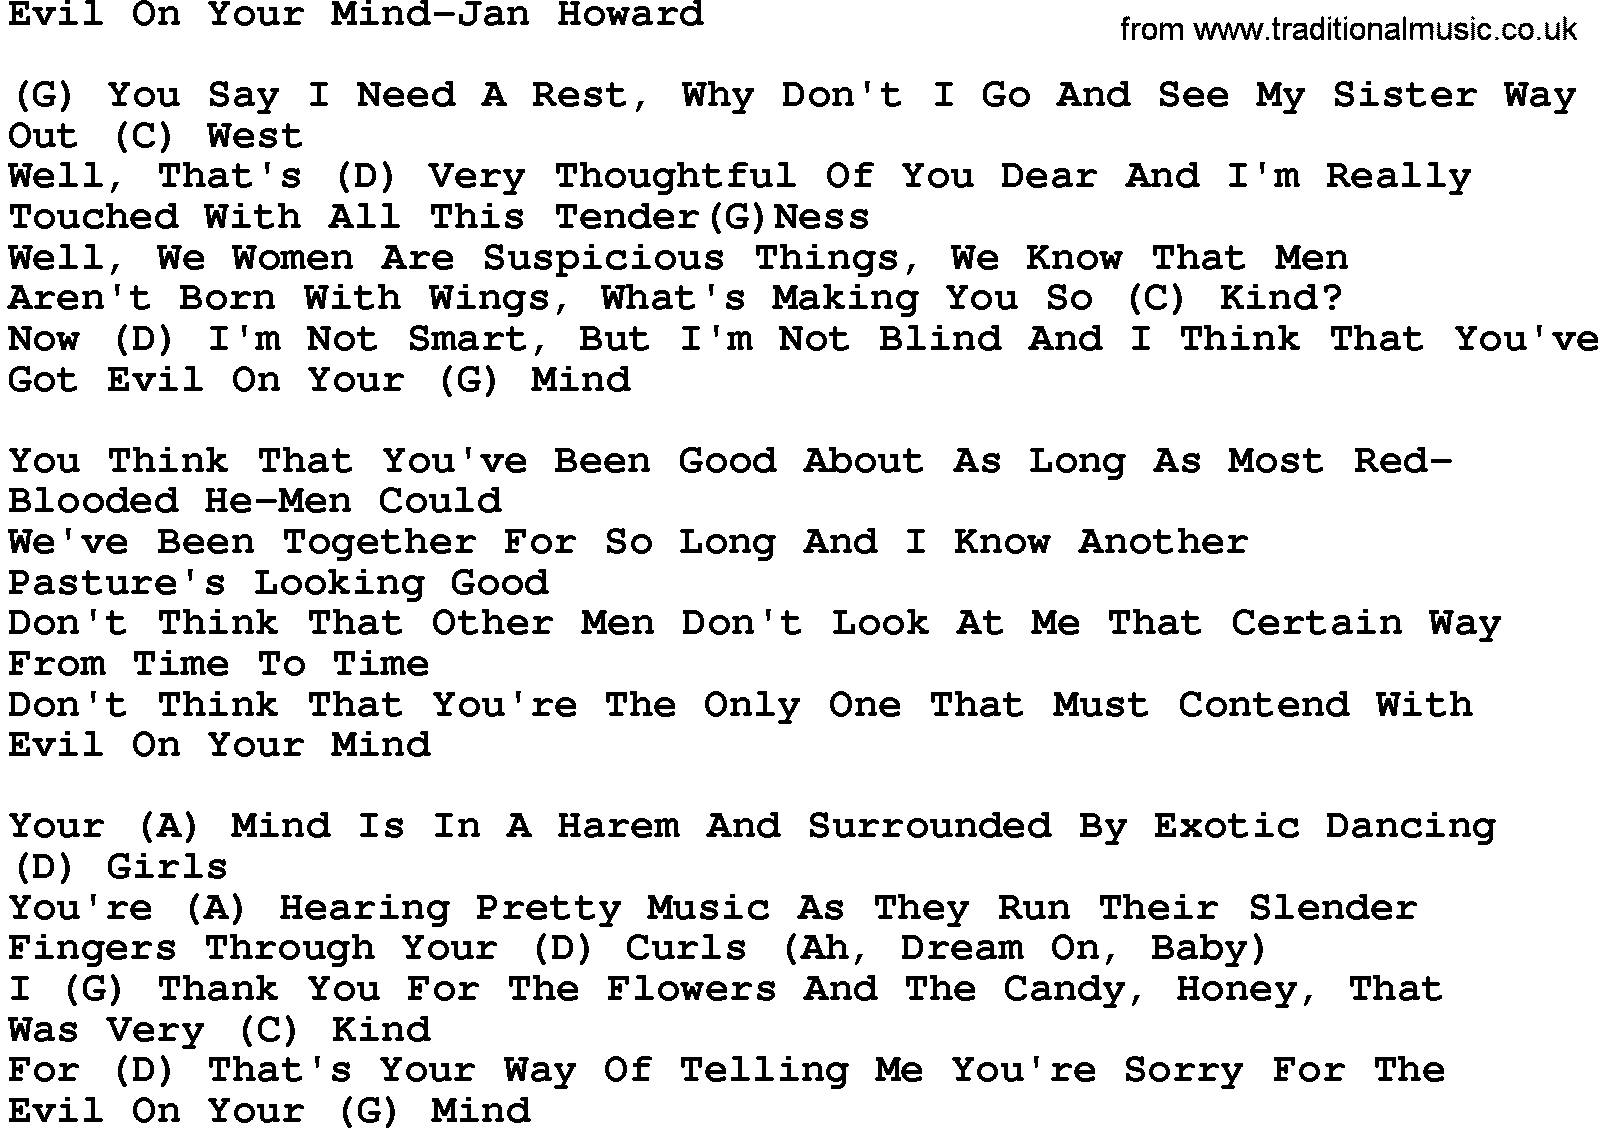 Country music song: Evil On Your Mind-Jan Howard lyrics and chords